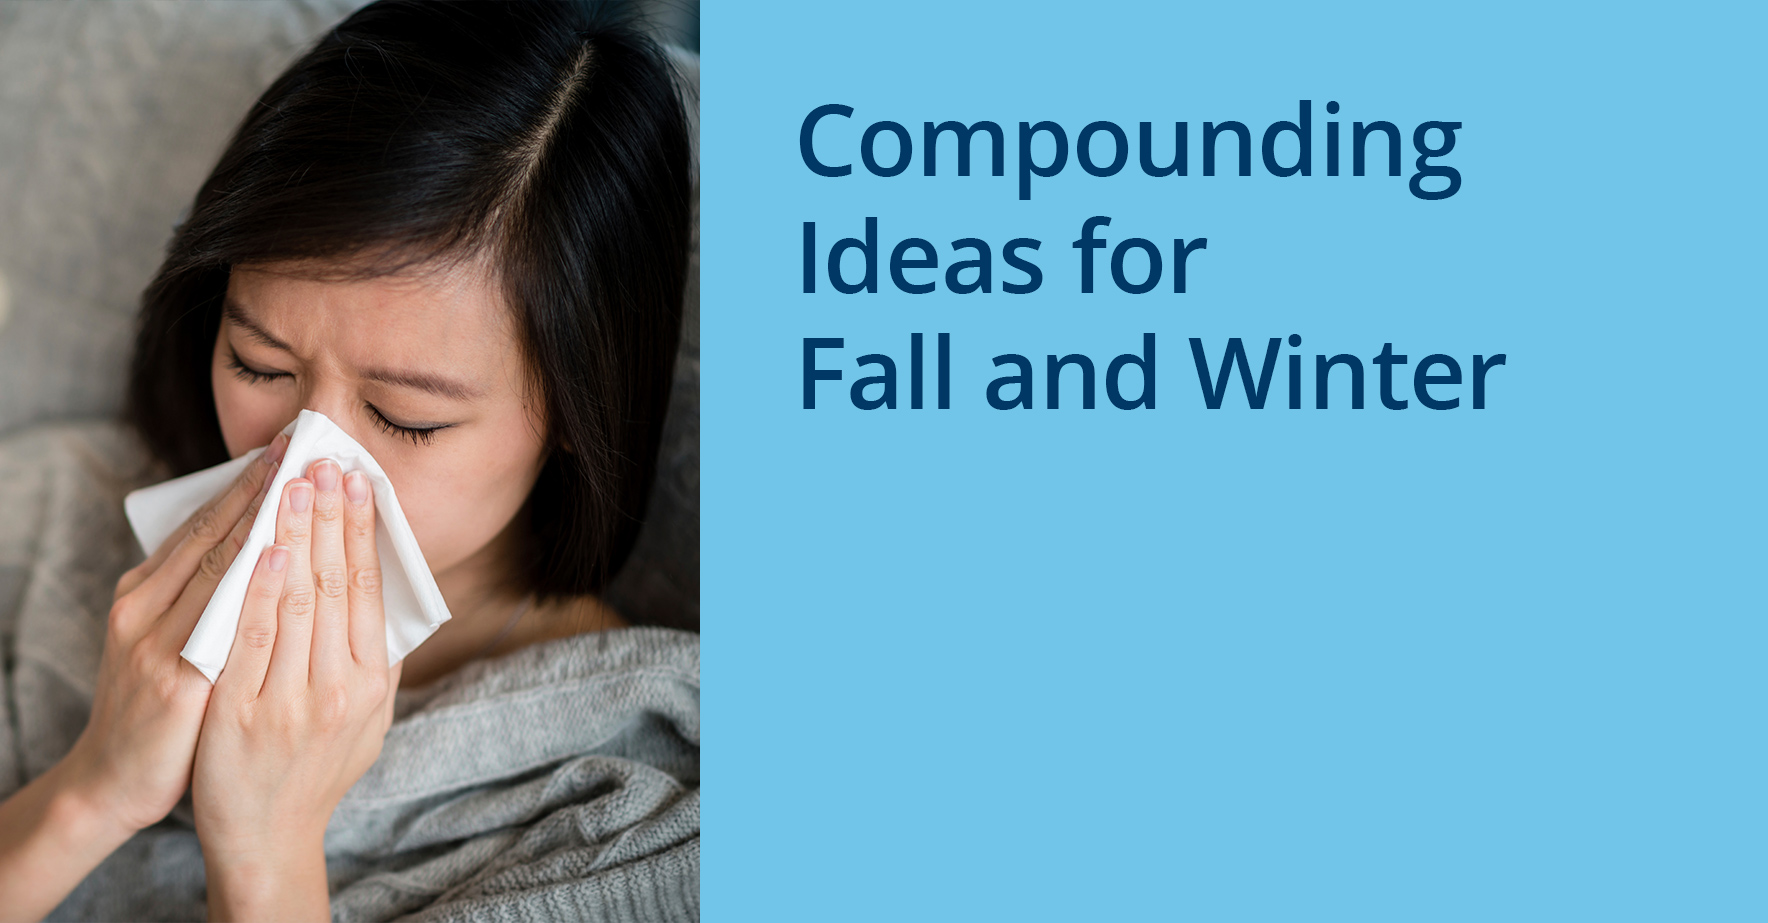 Compounding_Ideas_for_Fall_and_Winter.jpg